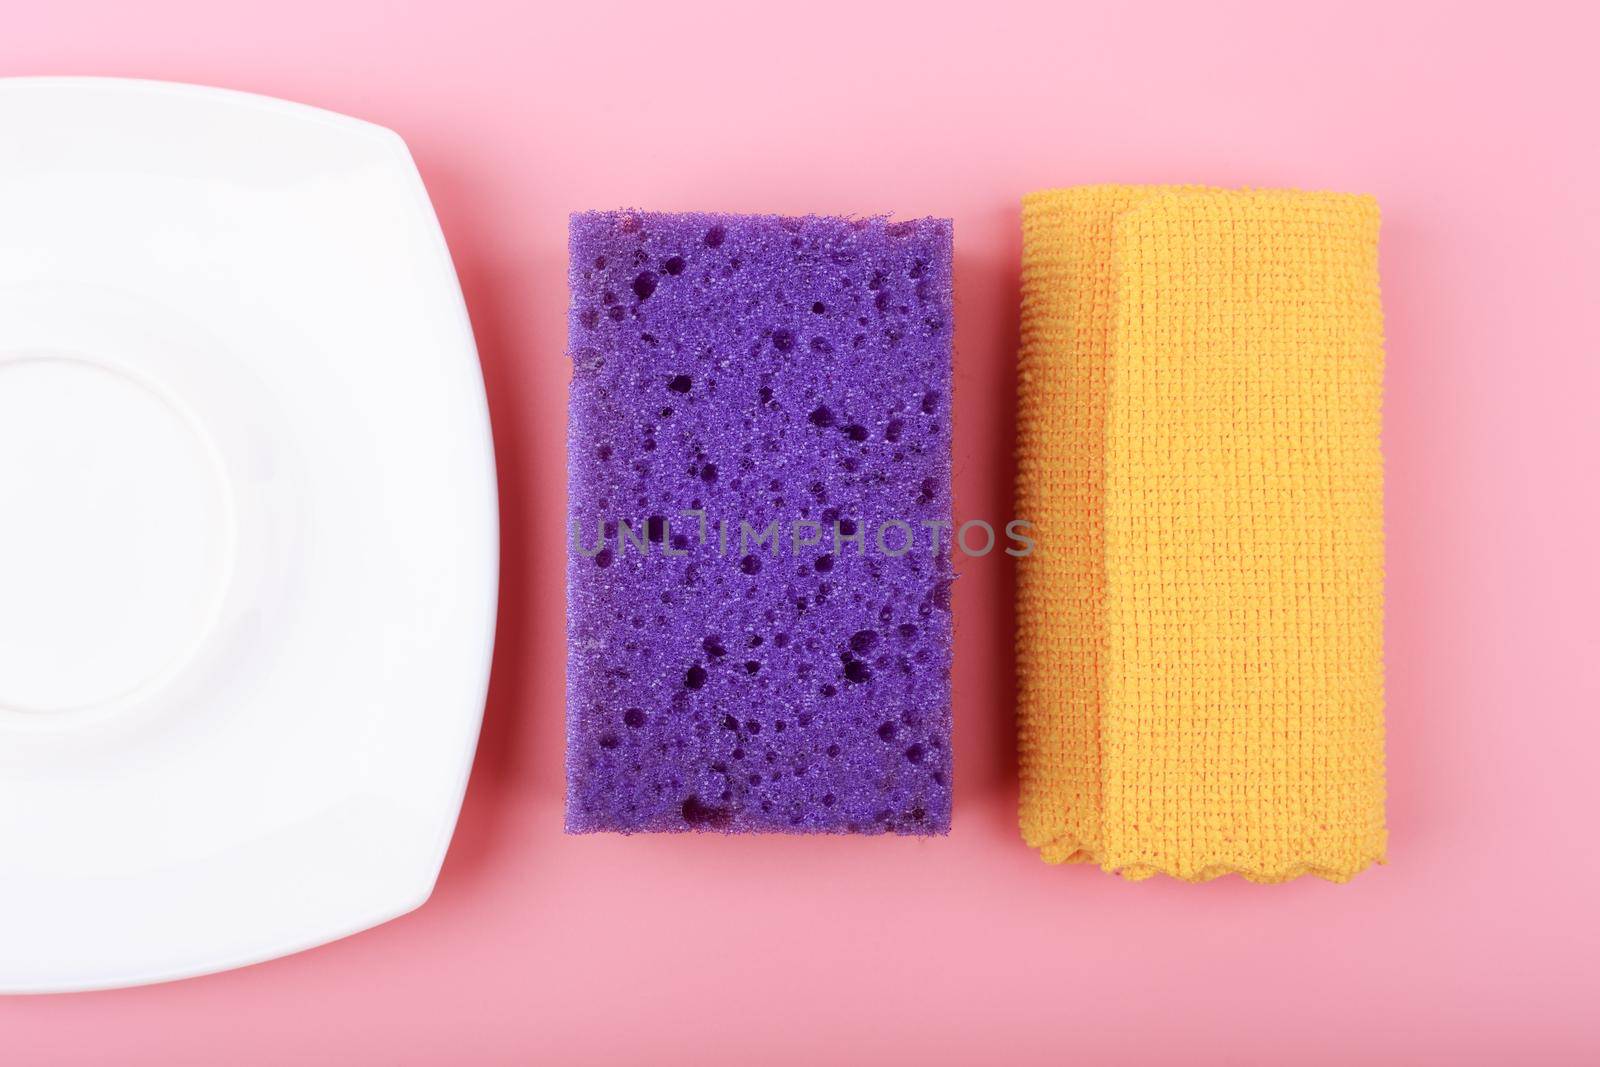 Creative flat lay with yellow dust cloth, white plate and purple cleaning sponge on pink background. House cleaning and dishwashing concept